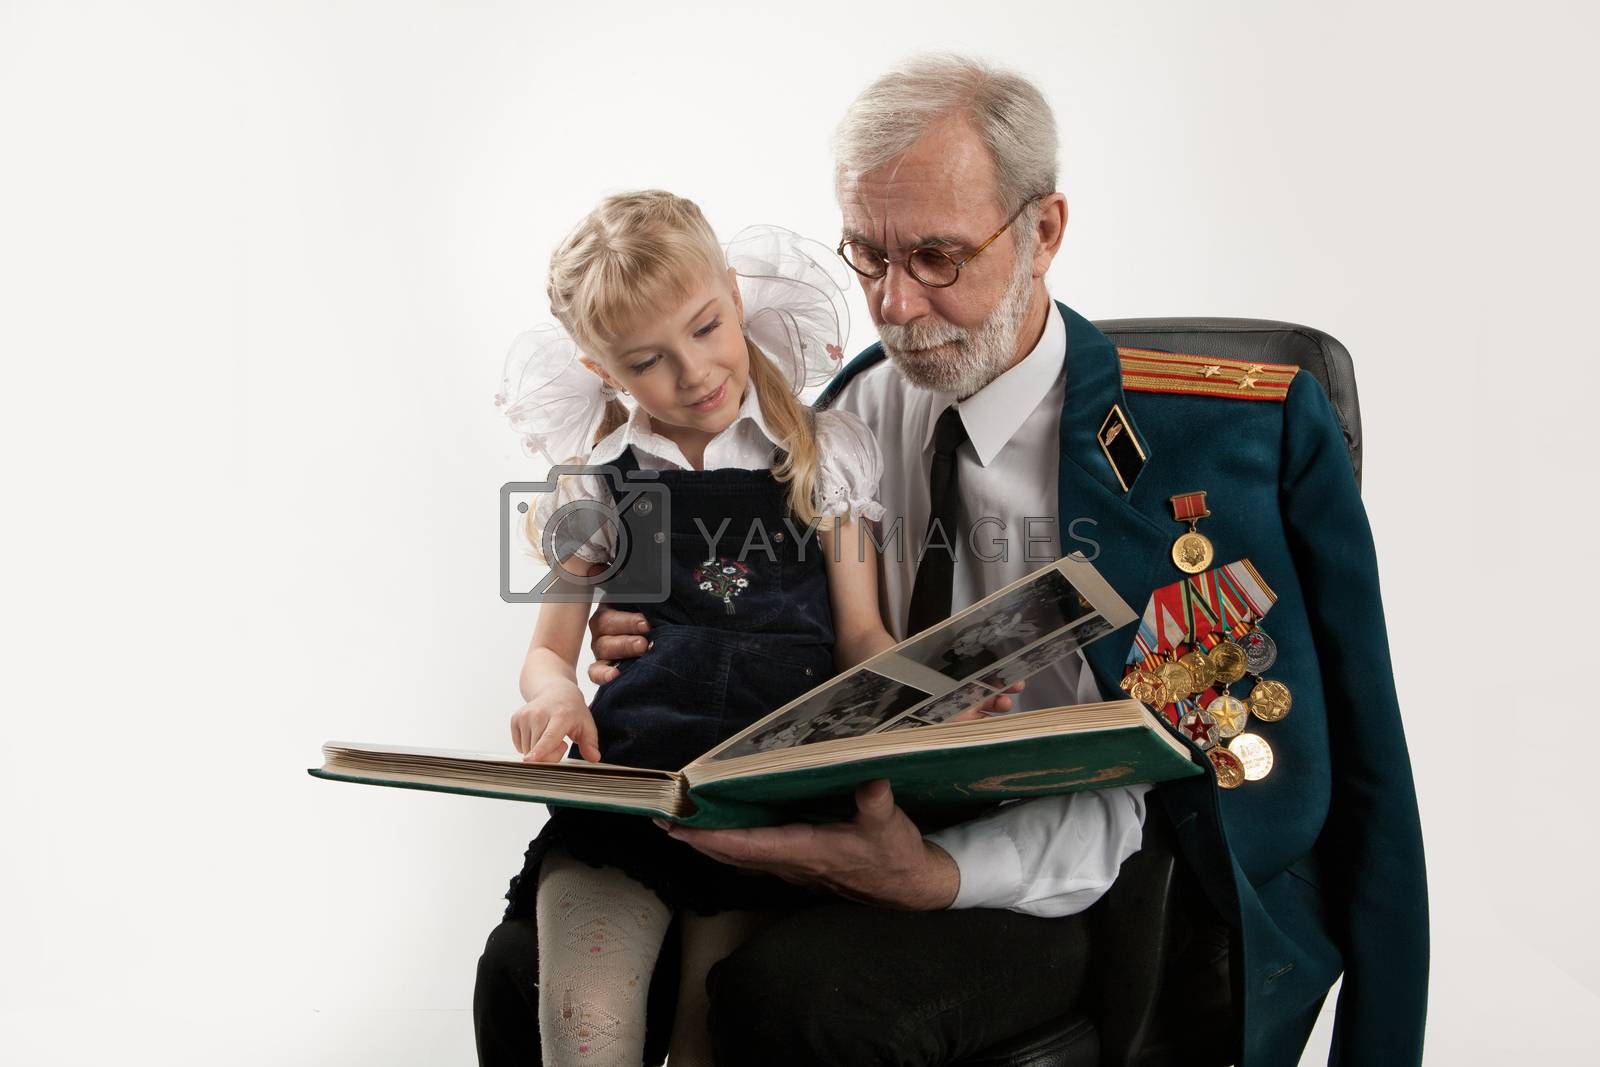 Royalty free image of Army Veteran And Little Girl by Fotoskat